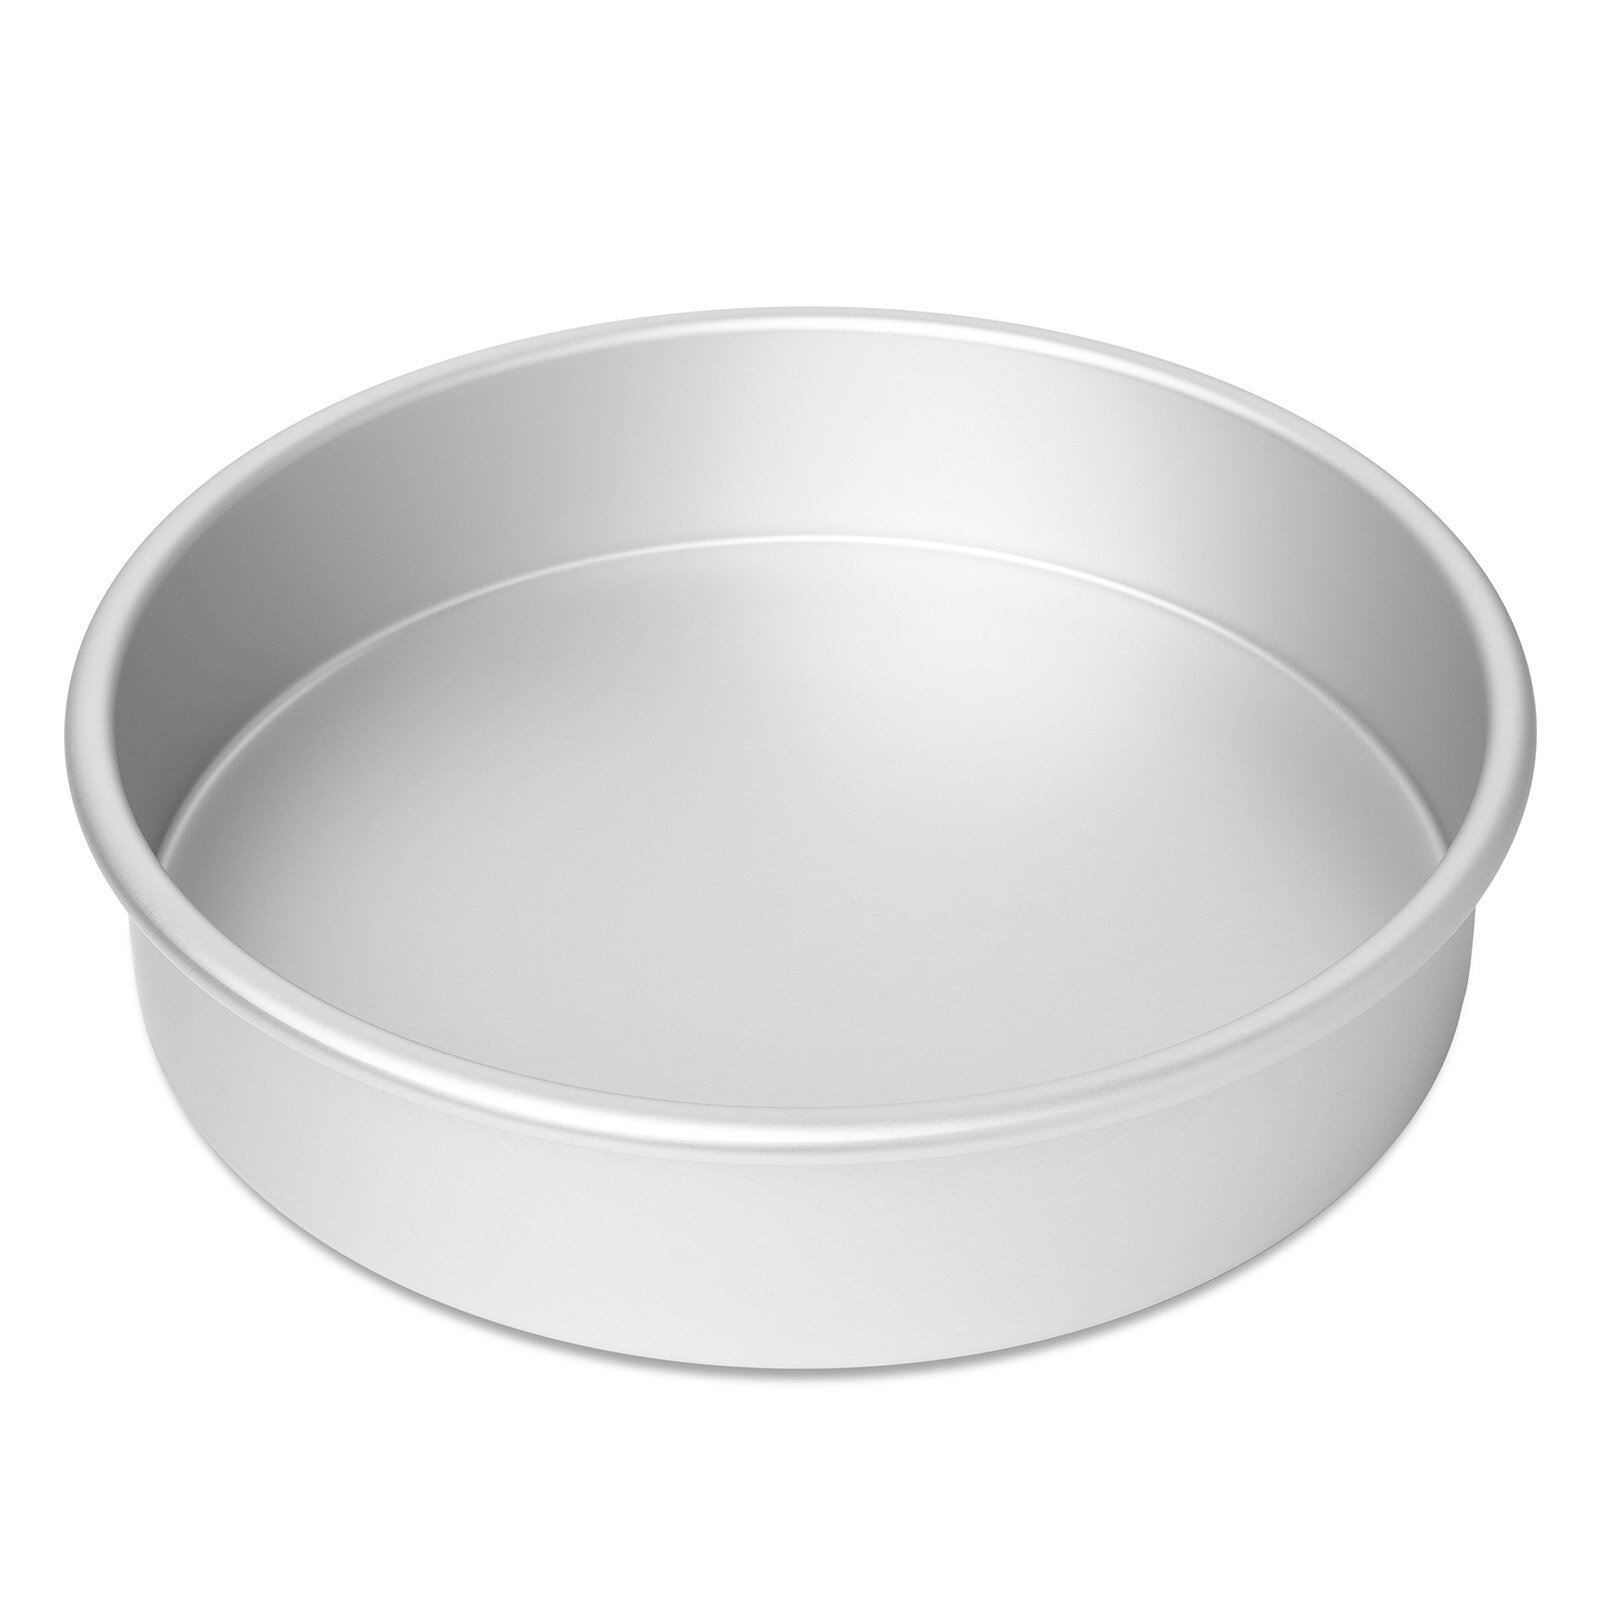  Wilton Aluminum Springform Pan, 8-Inch Round Pan for  Cheesecakes and Pizza: Springform Cake Pans: Home & Kitchen